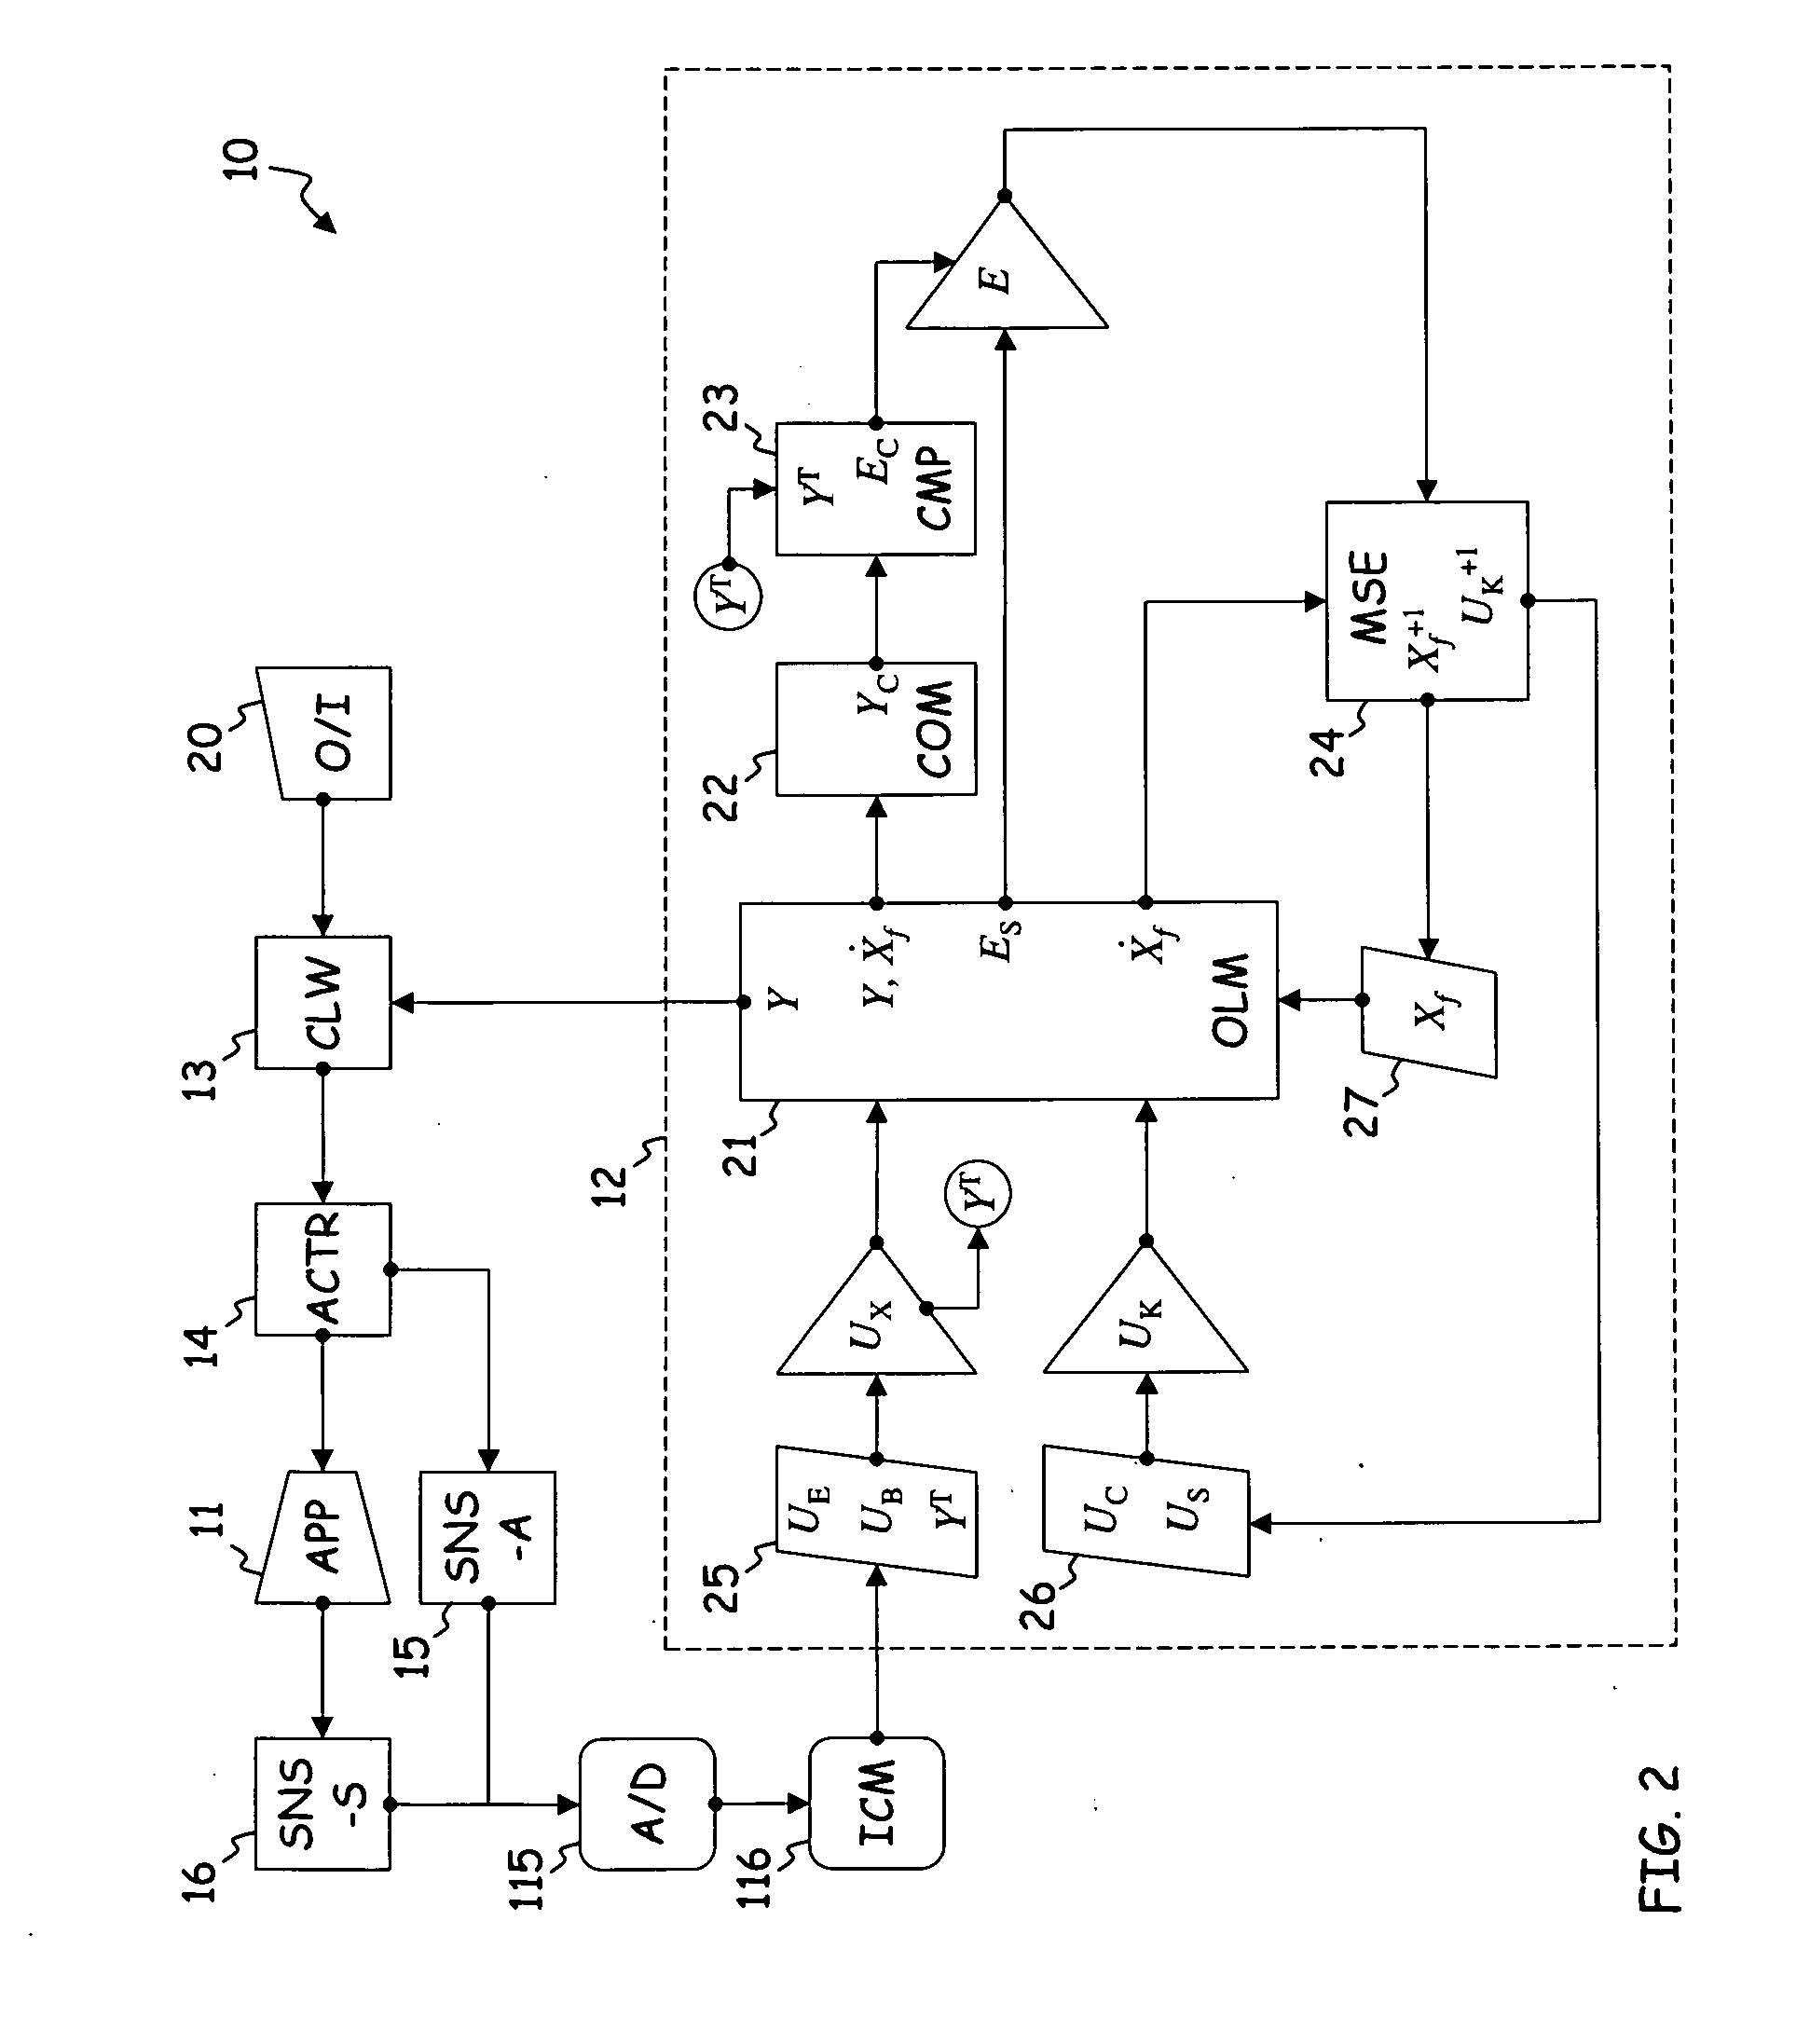 System and method for design and control of engineering systems utilizing component-level dynamic mathematical model